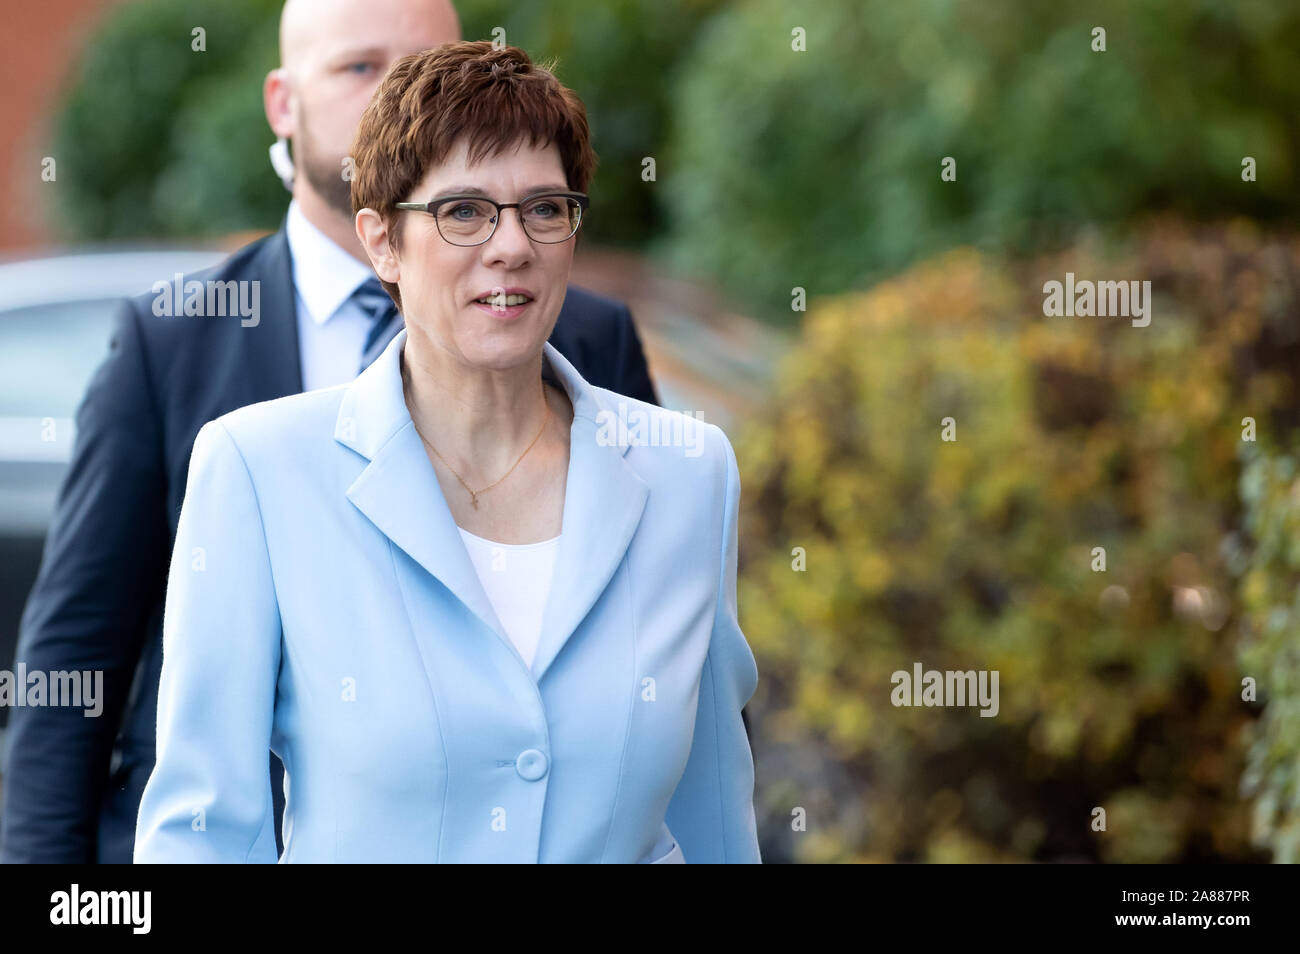 Munich, Germany. 07th Nov, 2019. Annegret Kramp-Karrenbauer (CDU), Federal Minister of Defense, comes to visit the University of the Bundeswehr. Kramp-Karrenbauer plans to establish a National Security Council in Germany. Credit: Sven Hoppe/dpa/Alamy Live News Stock Photo